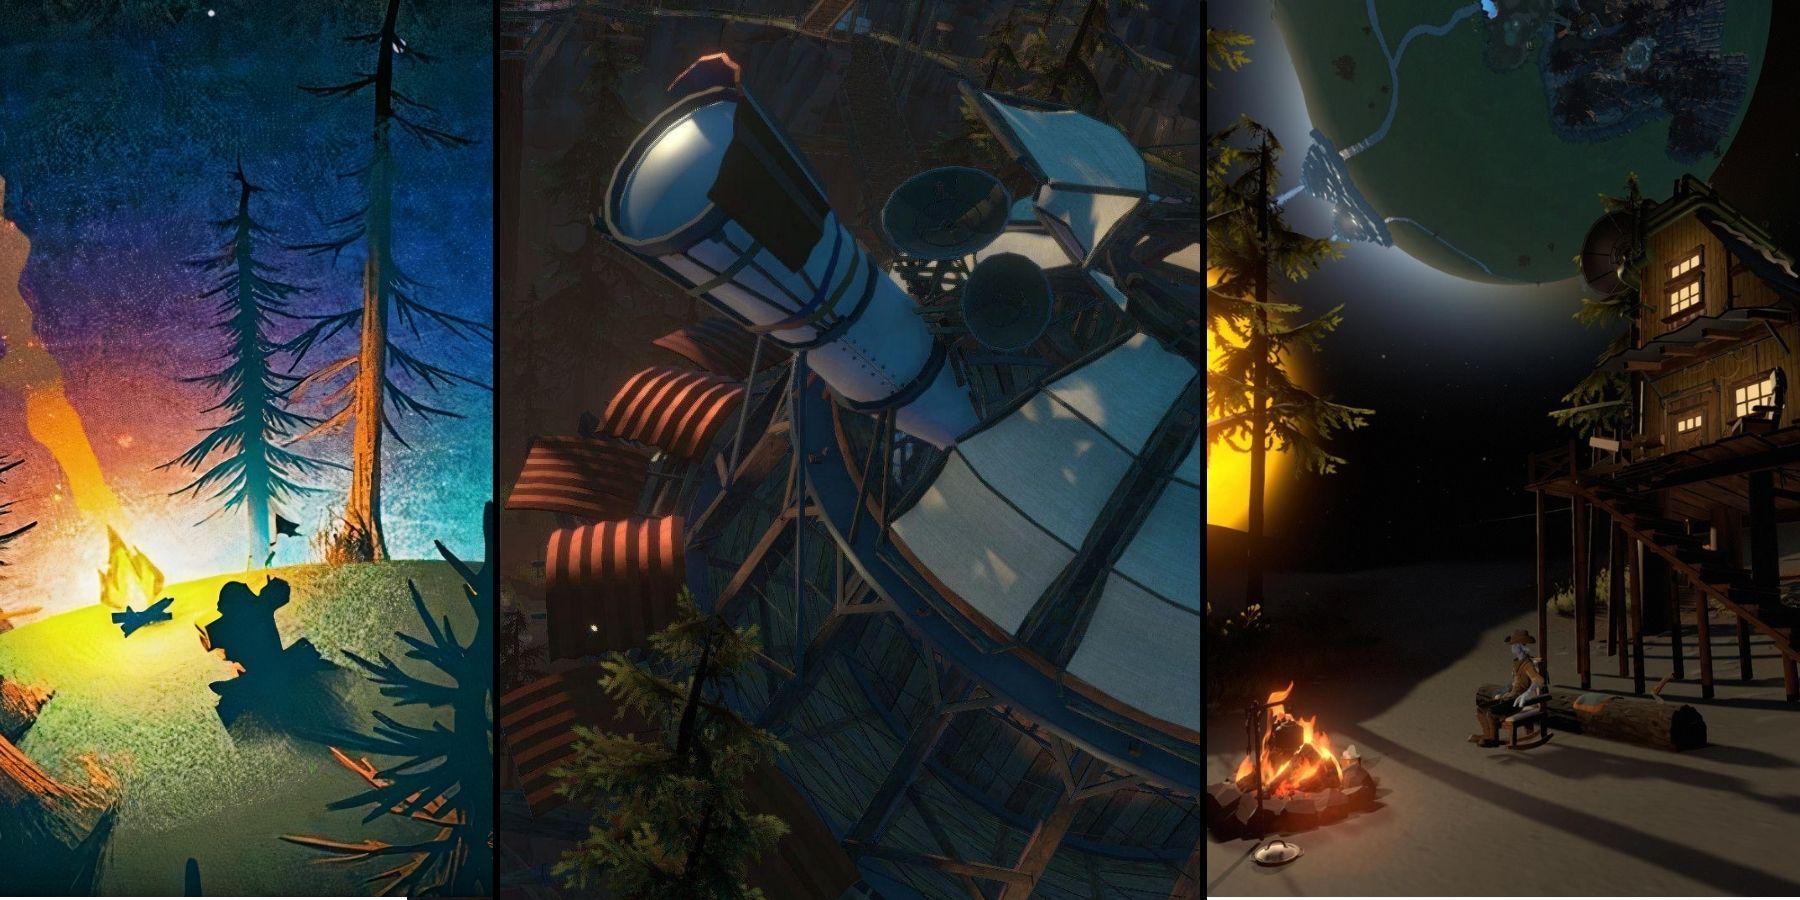 How Long Does It Take To Finish Outer Wilds And Its Expansion?